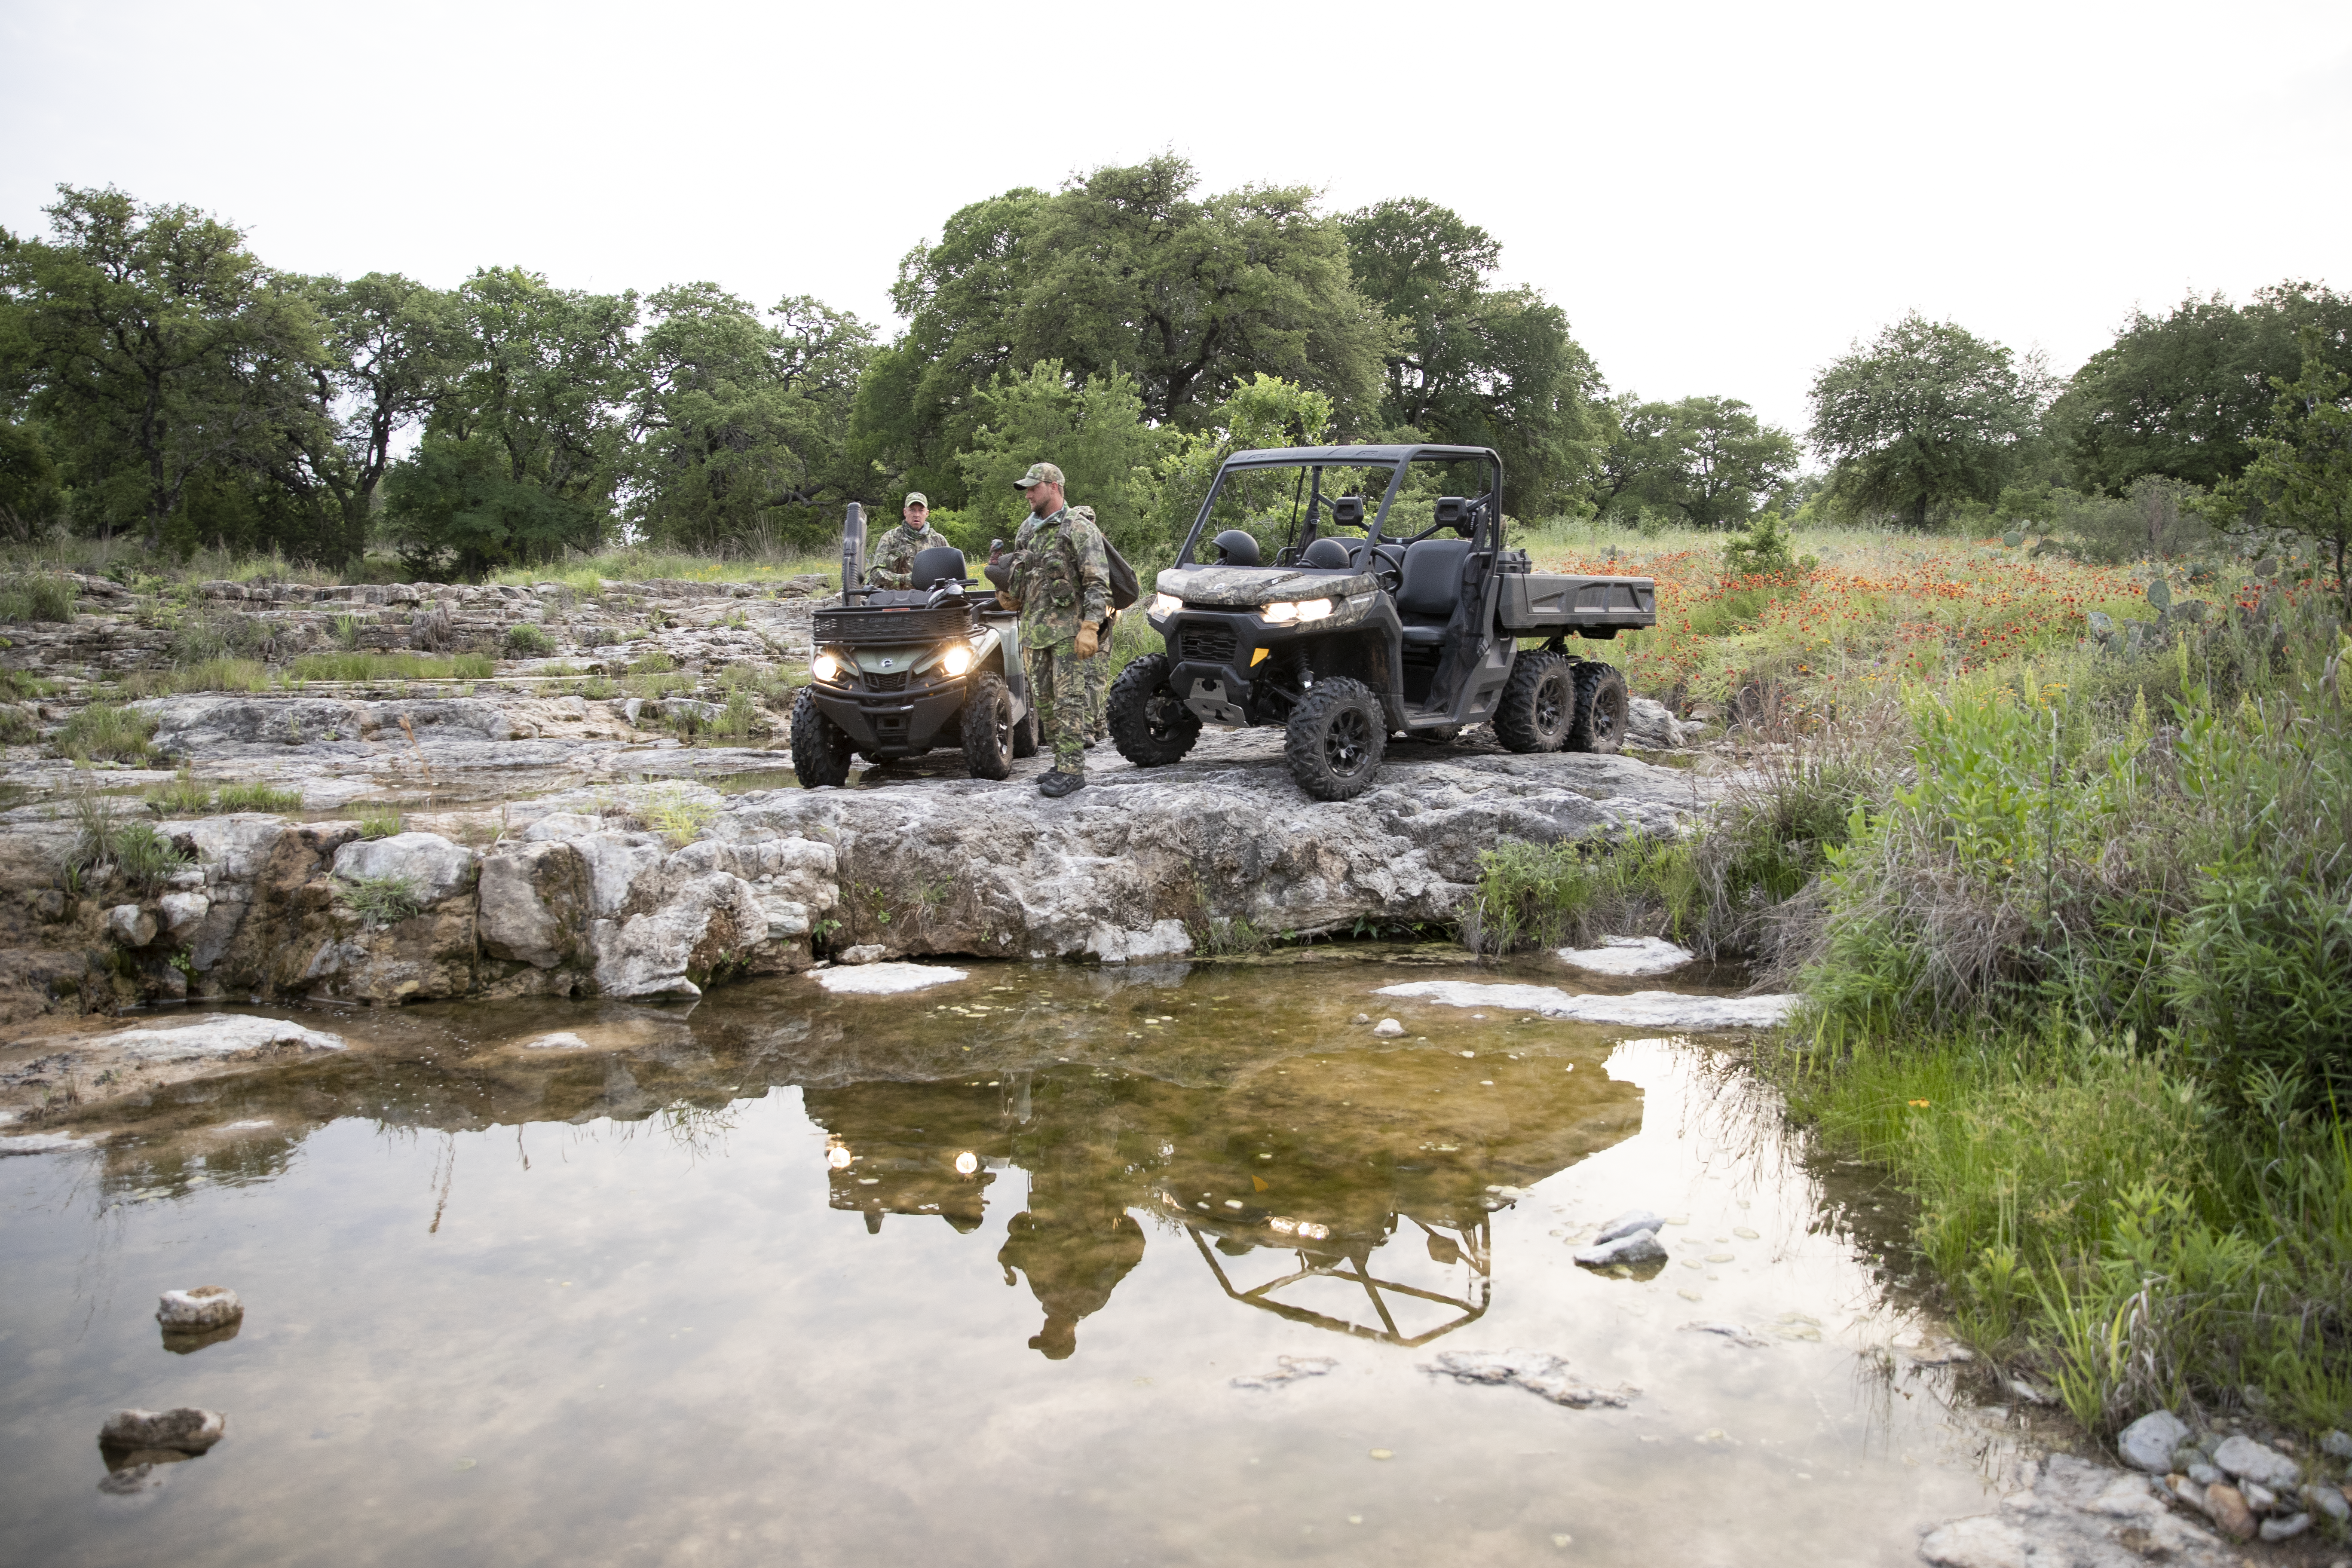 Two hunters near the water next to a custom hunting Can-Am Defender side-by-side